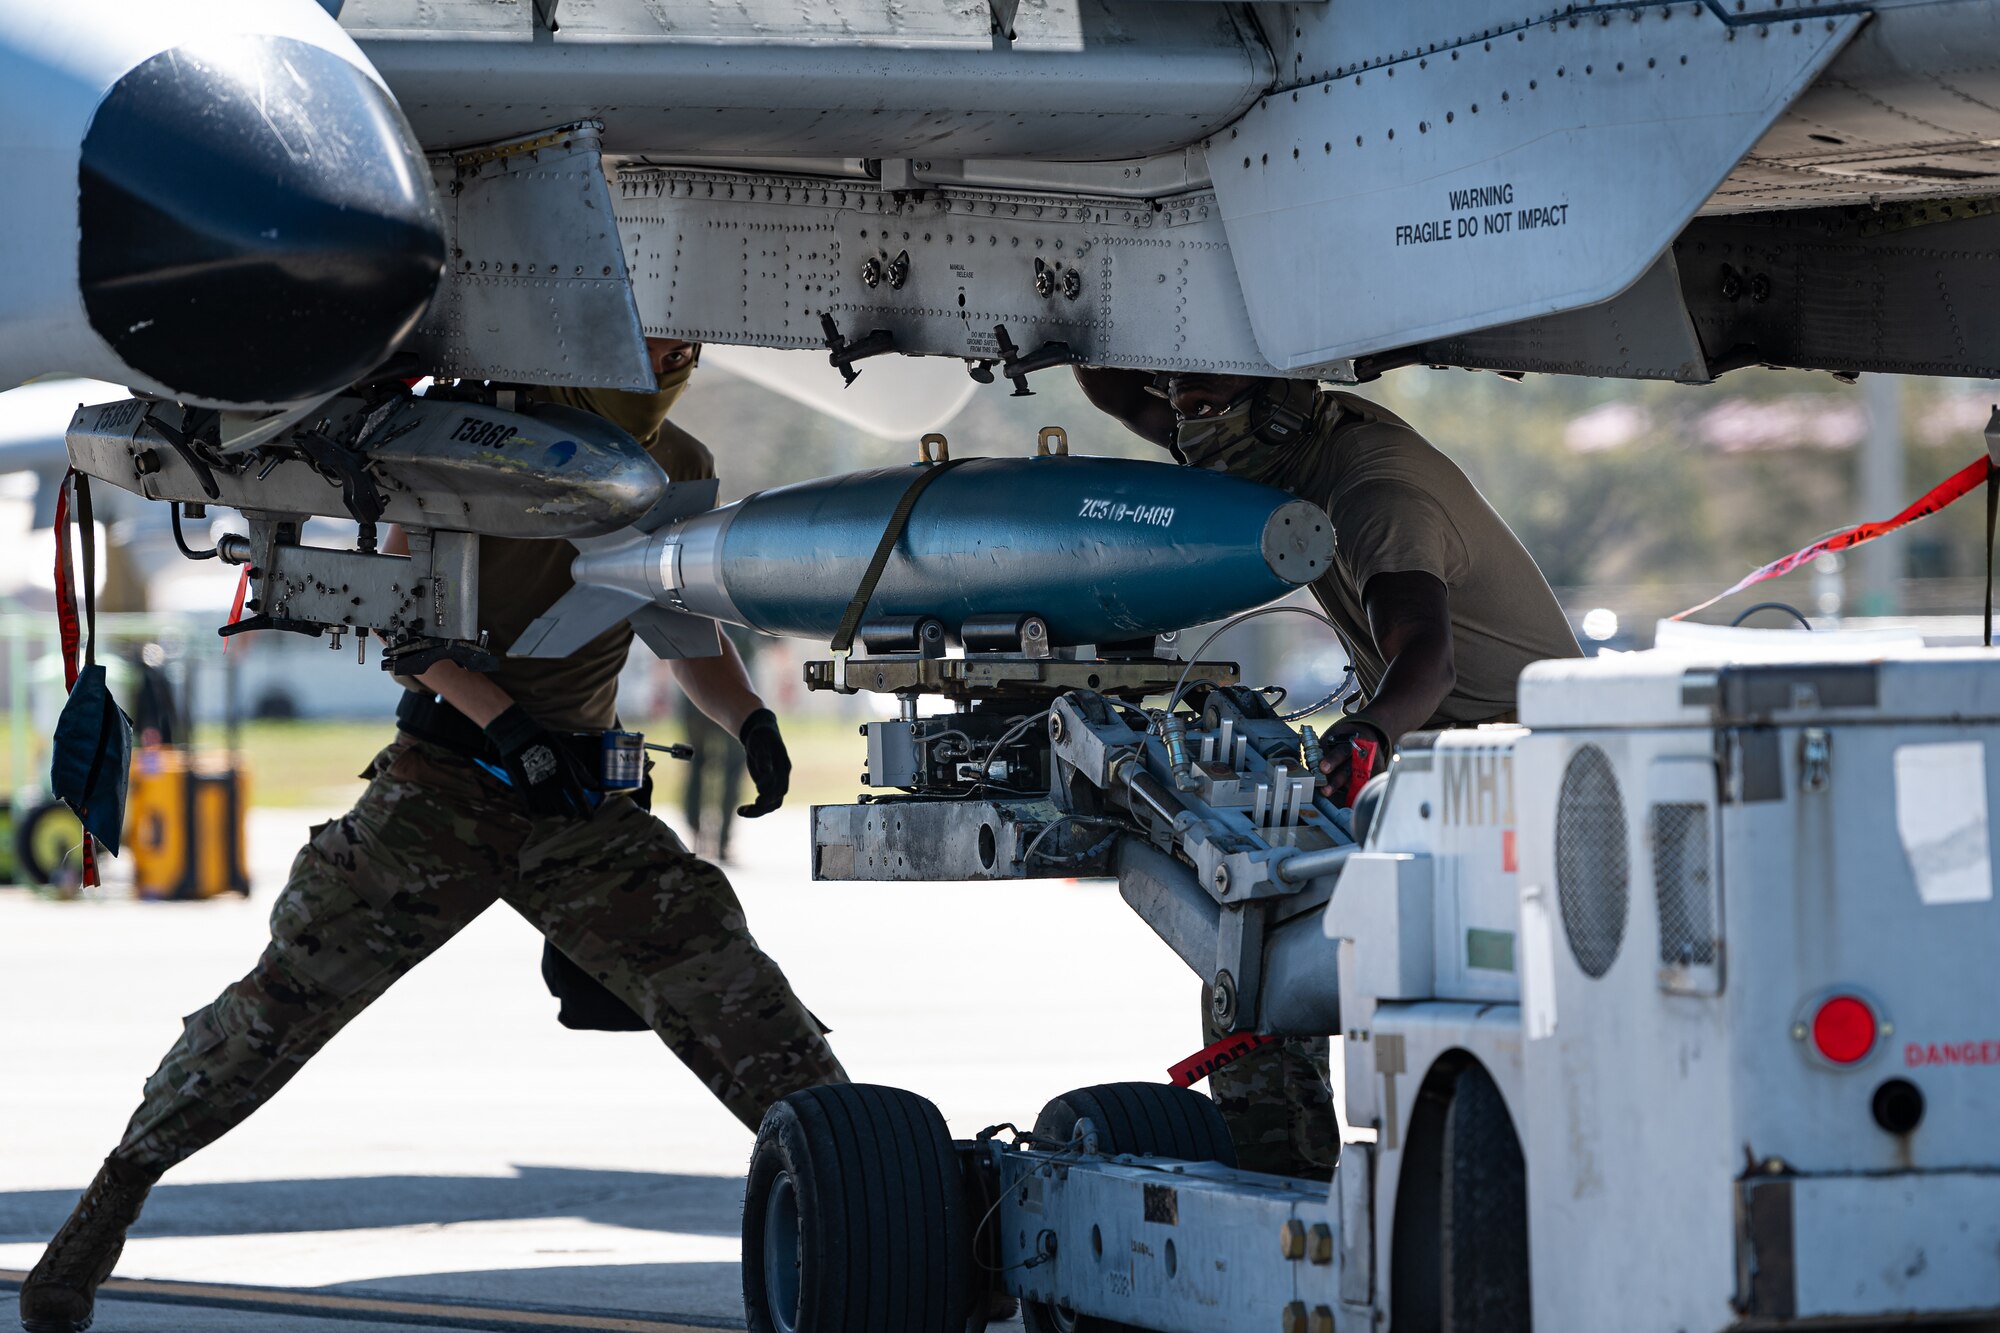 A photo of Airmen loading bombs onto an aircraft